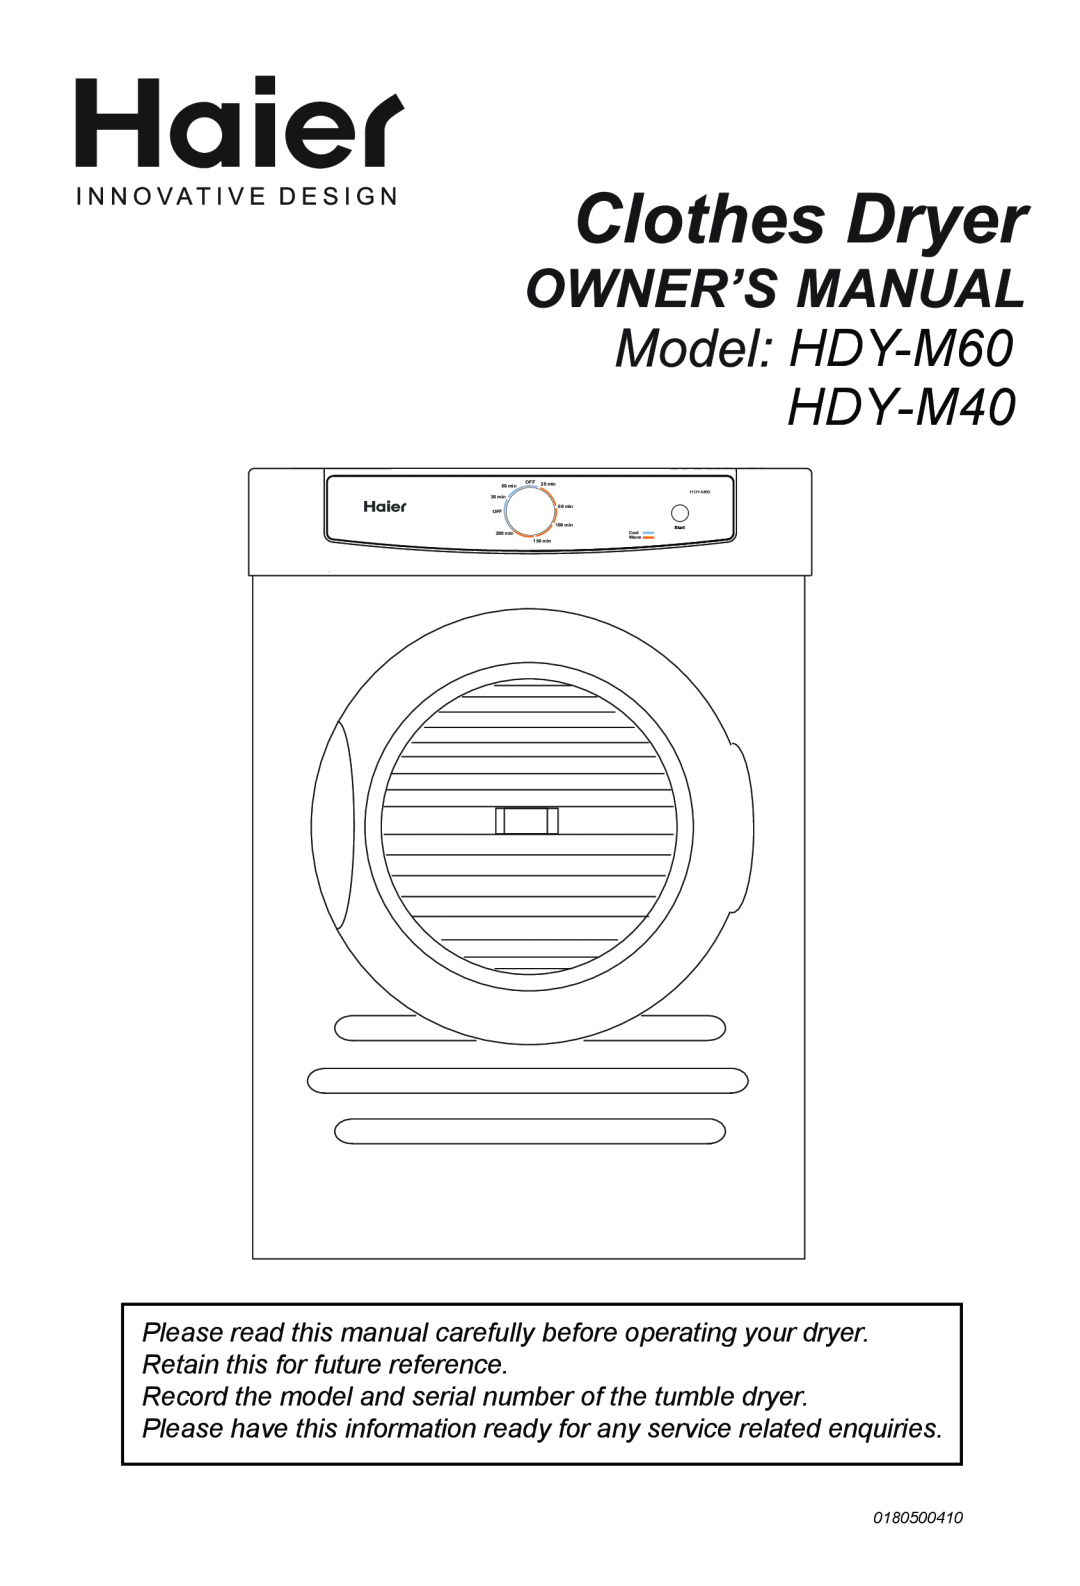 Haier manual HDY-M60 HDY-M40, Record the model and serial number of the tumble dryer, 0180500410, 60 min, 20 min, Cool 